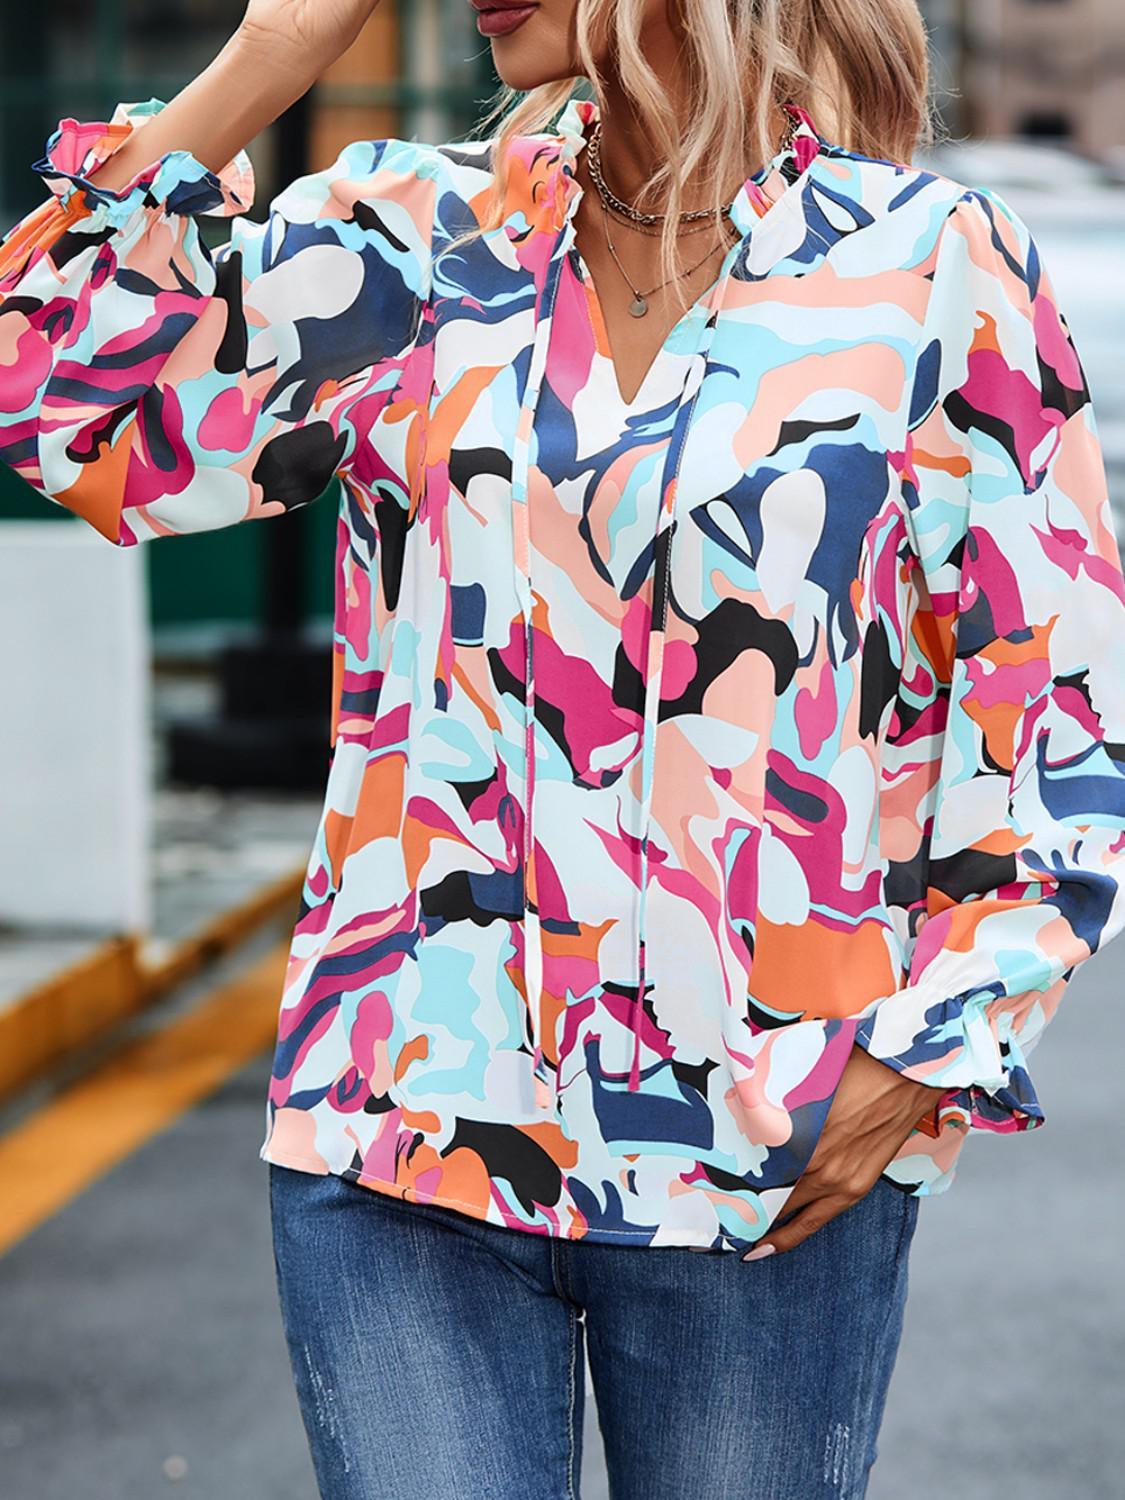 a woman wearing a colorful shirt and jeans